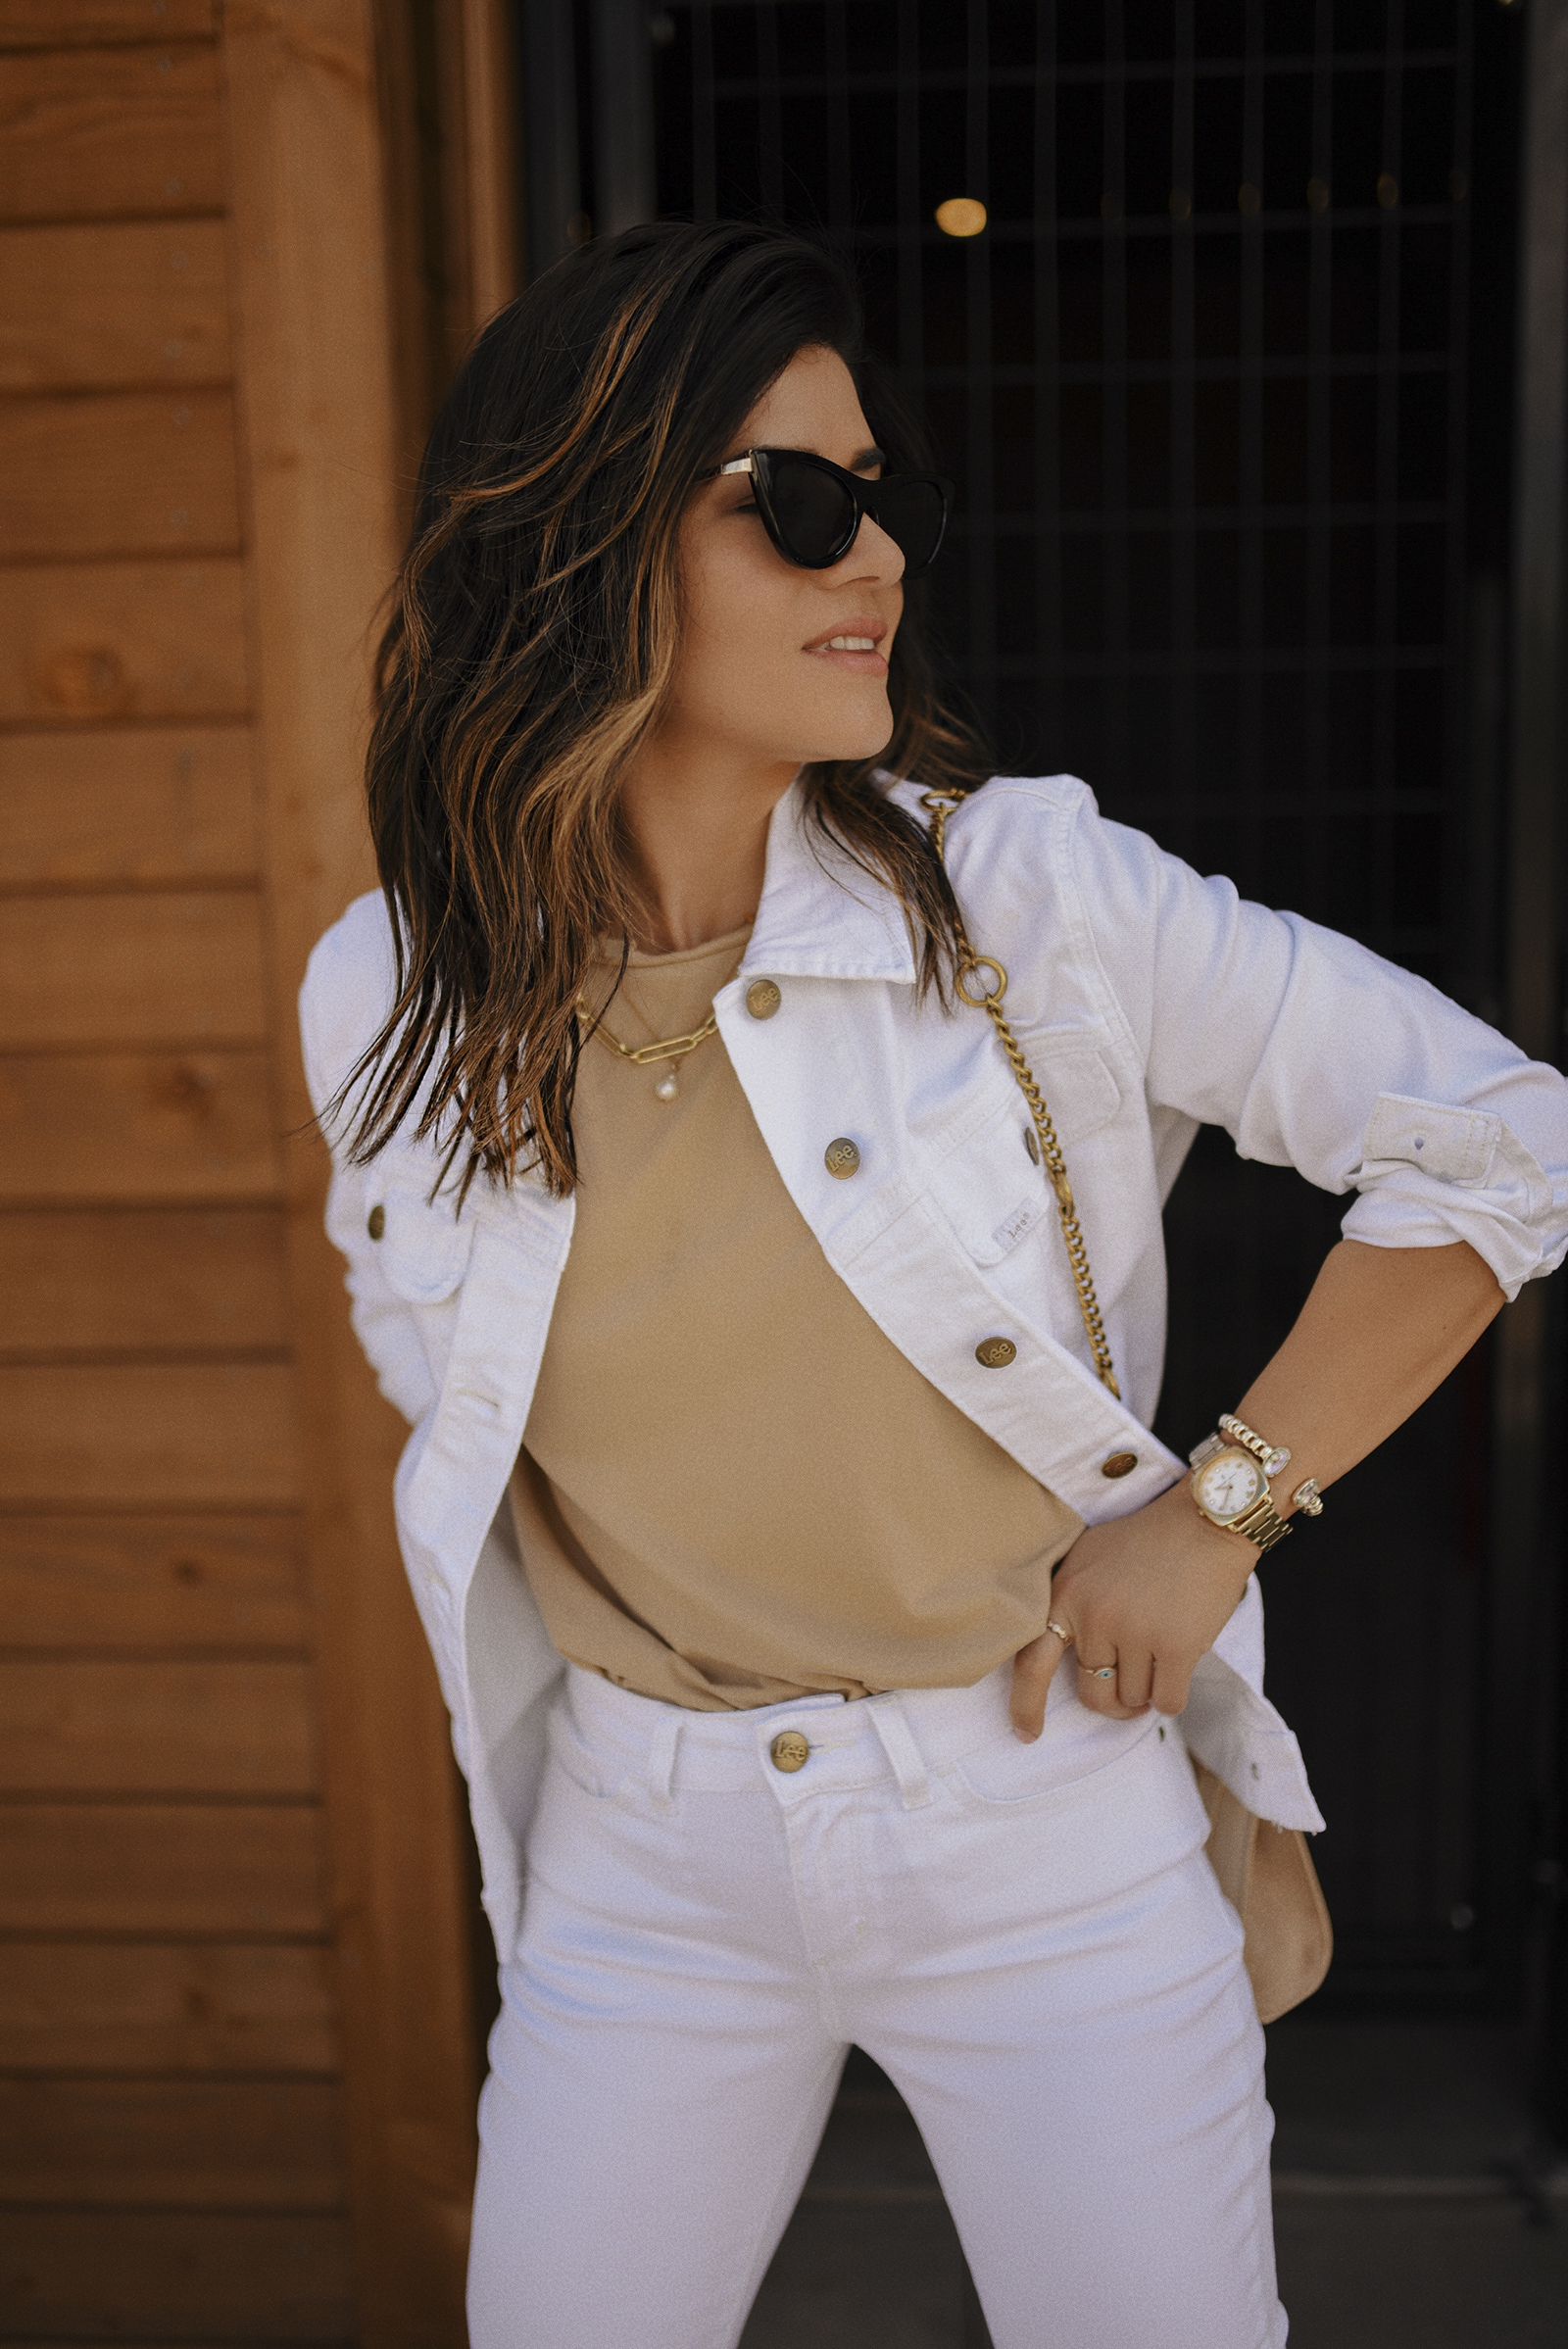 Carolina Hellal of Chic Talk wearing a LEE Jeans white denim jacket and LEE white jeans, Sam Edelman nude pumps and Le Specs last The last Lolita sunglasses